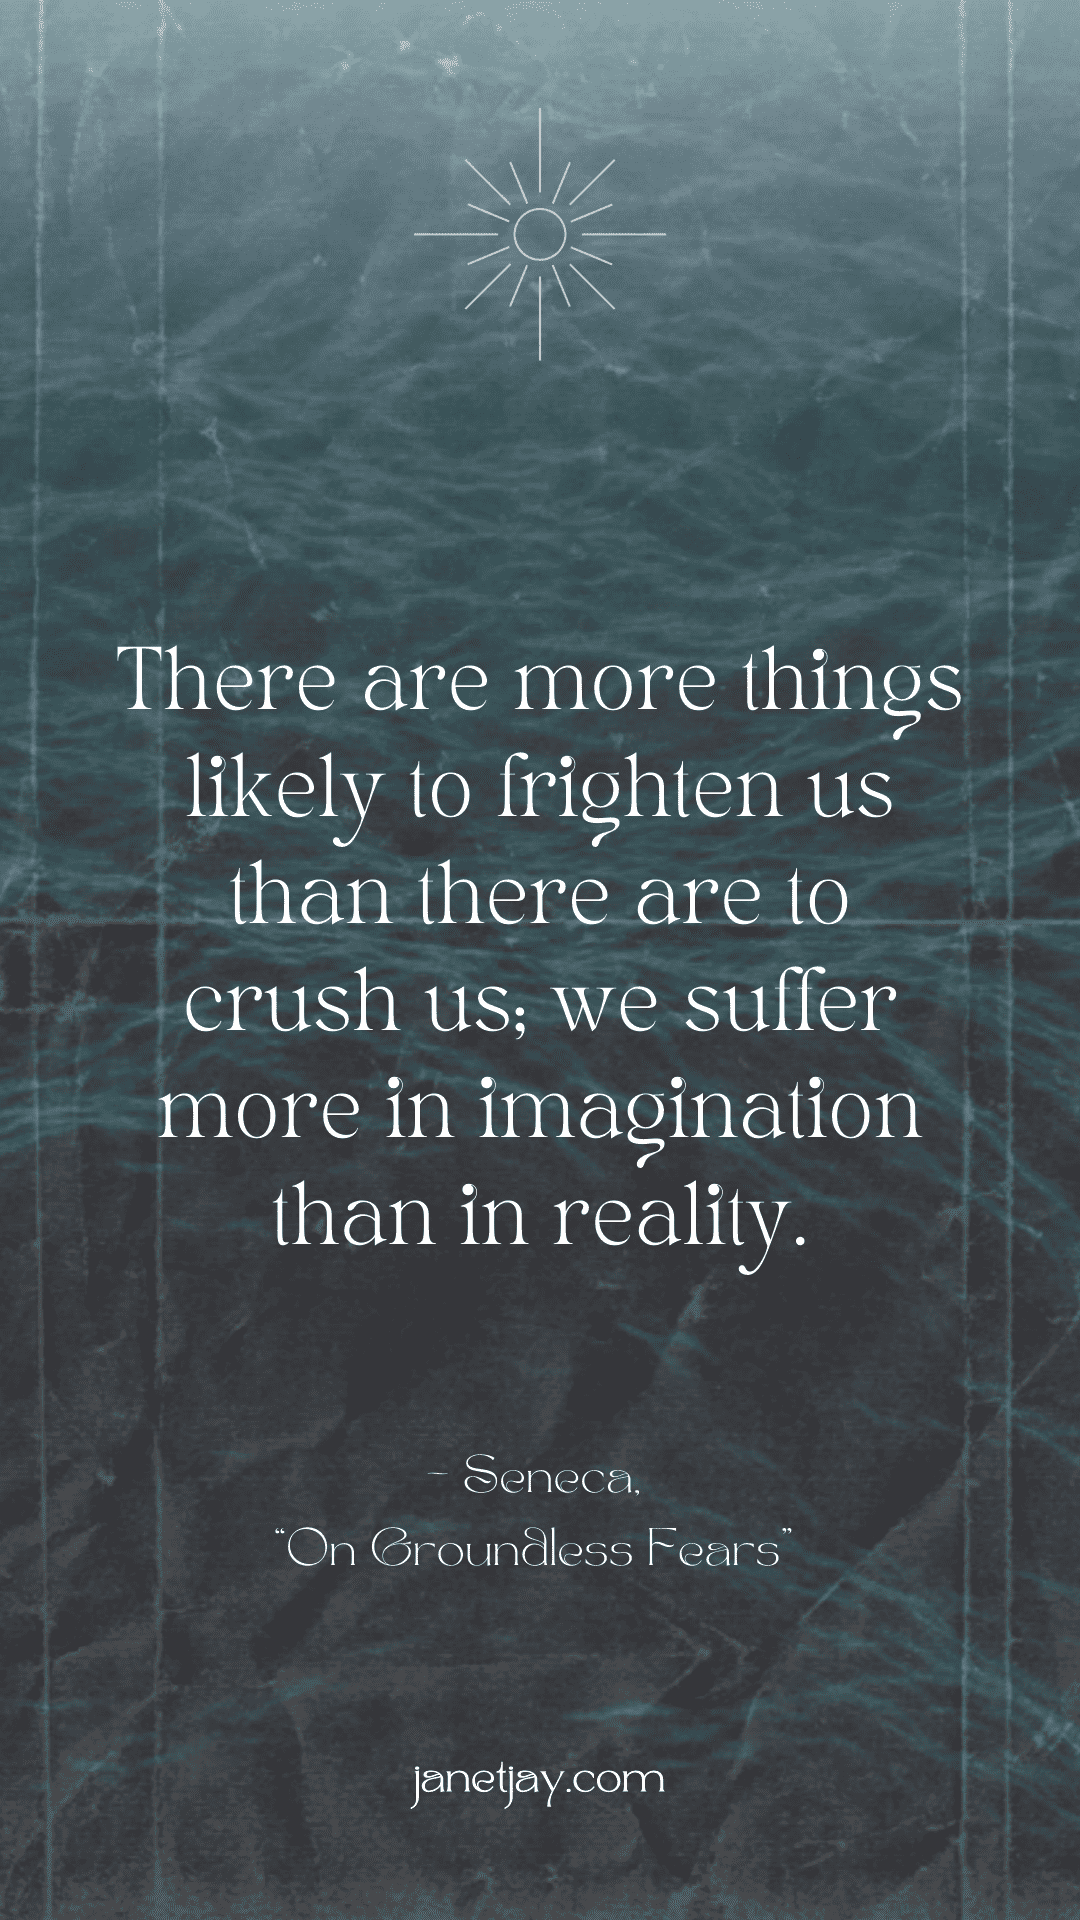 "There are more things likely to frighten us than there are to crush us; we suffer more in imagination than in reality - Seneca, on groundless fears, janetjay.com" on a background of grey waves